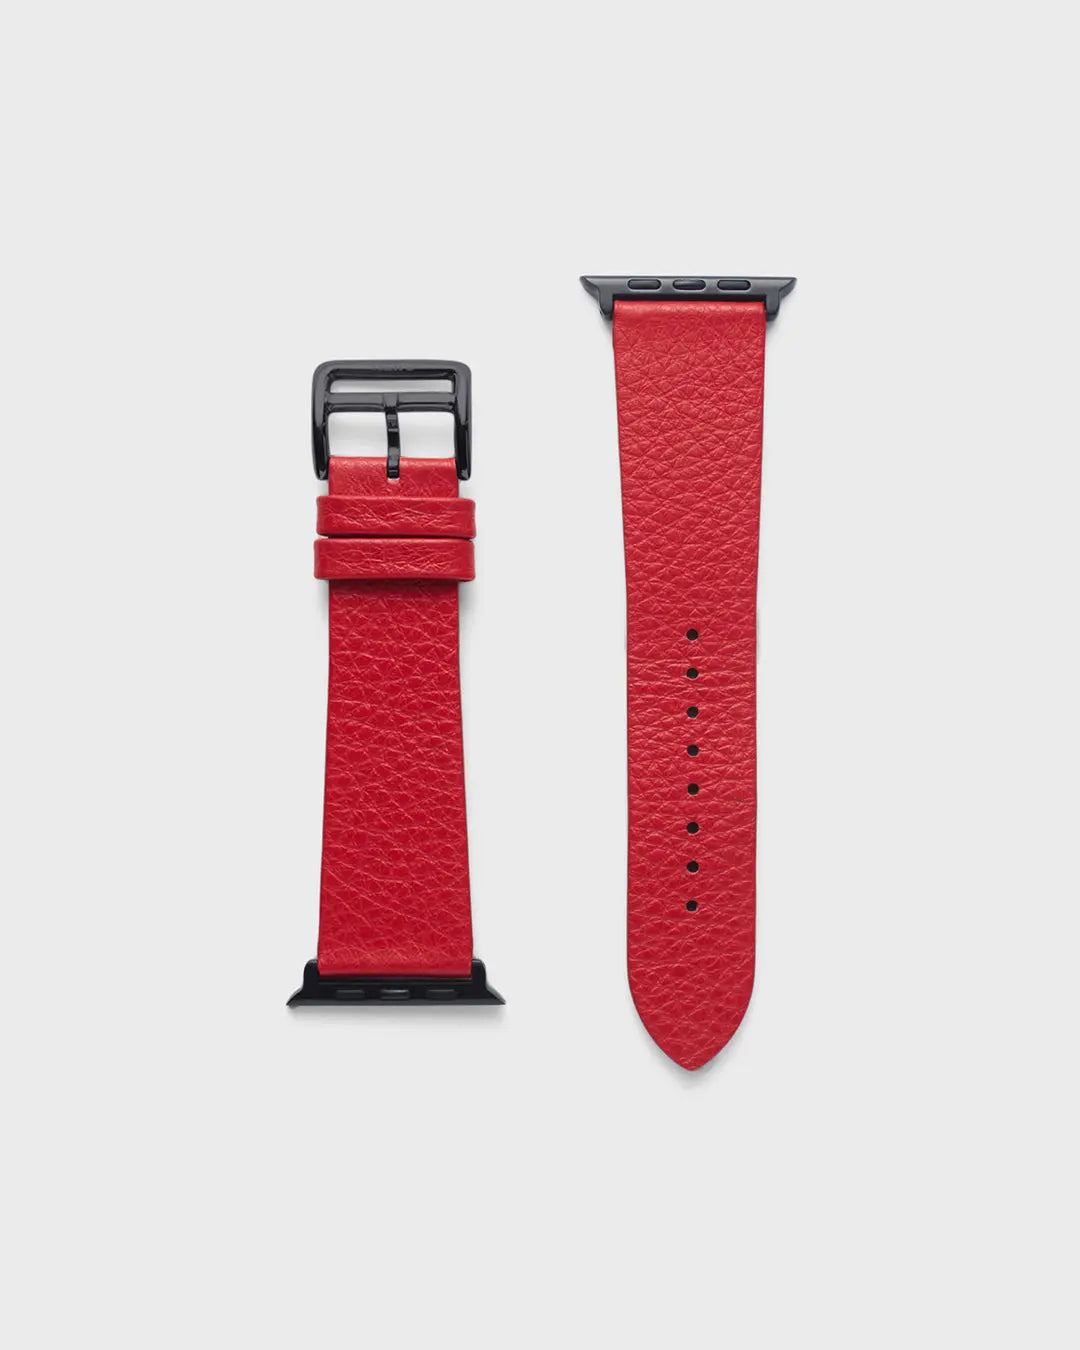 VIBE STRAP - FOR APPLE WATCH [Seamless in Italian full grain pebble leather] HEllO